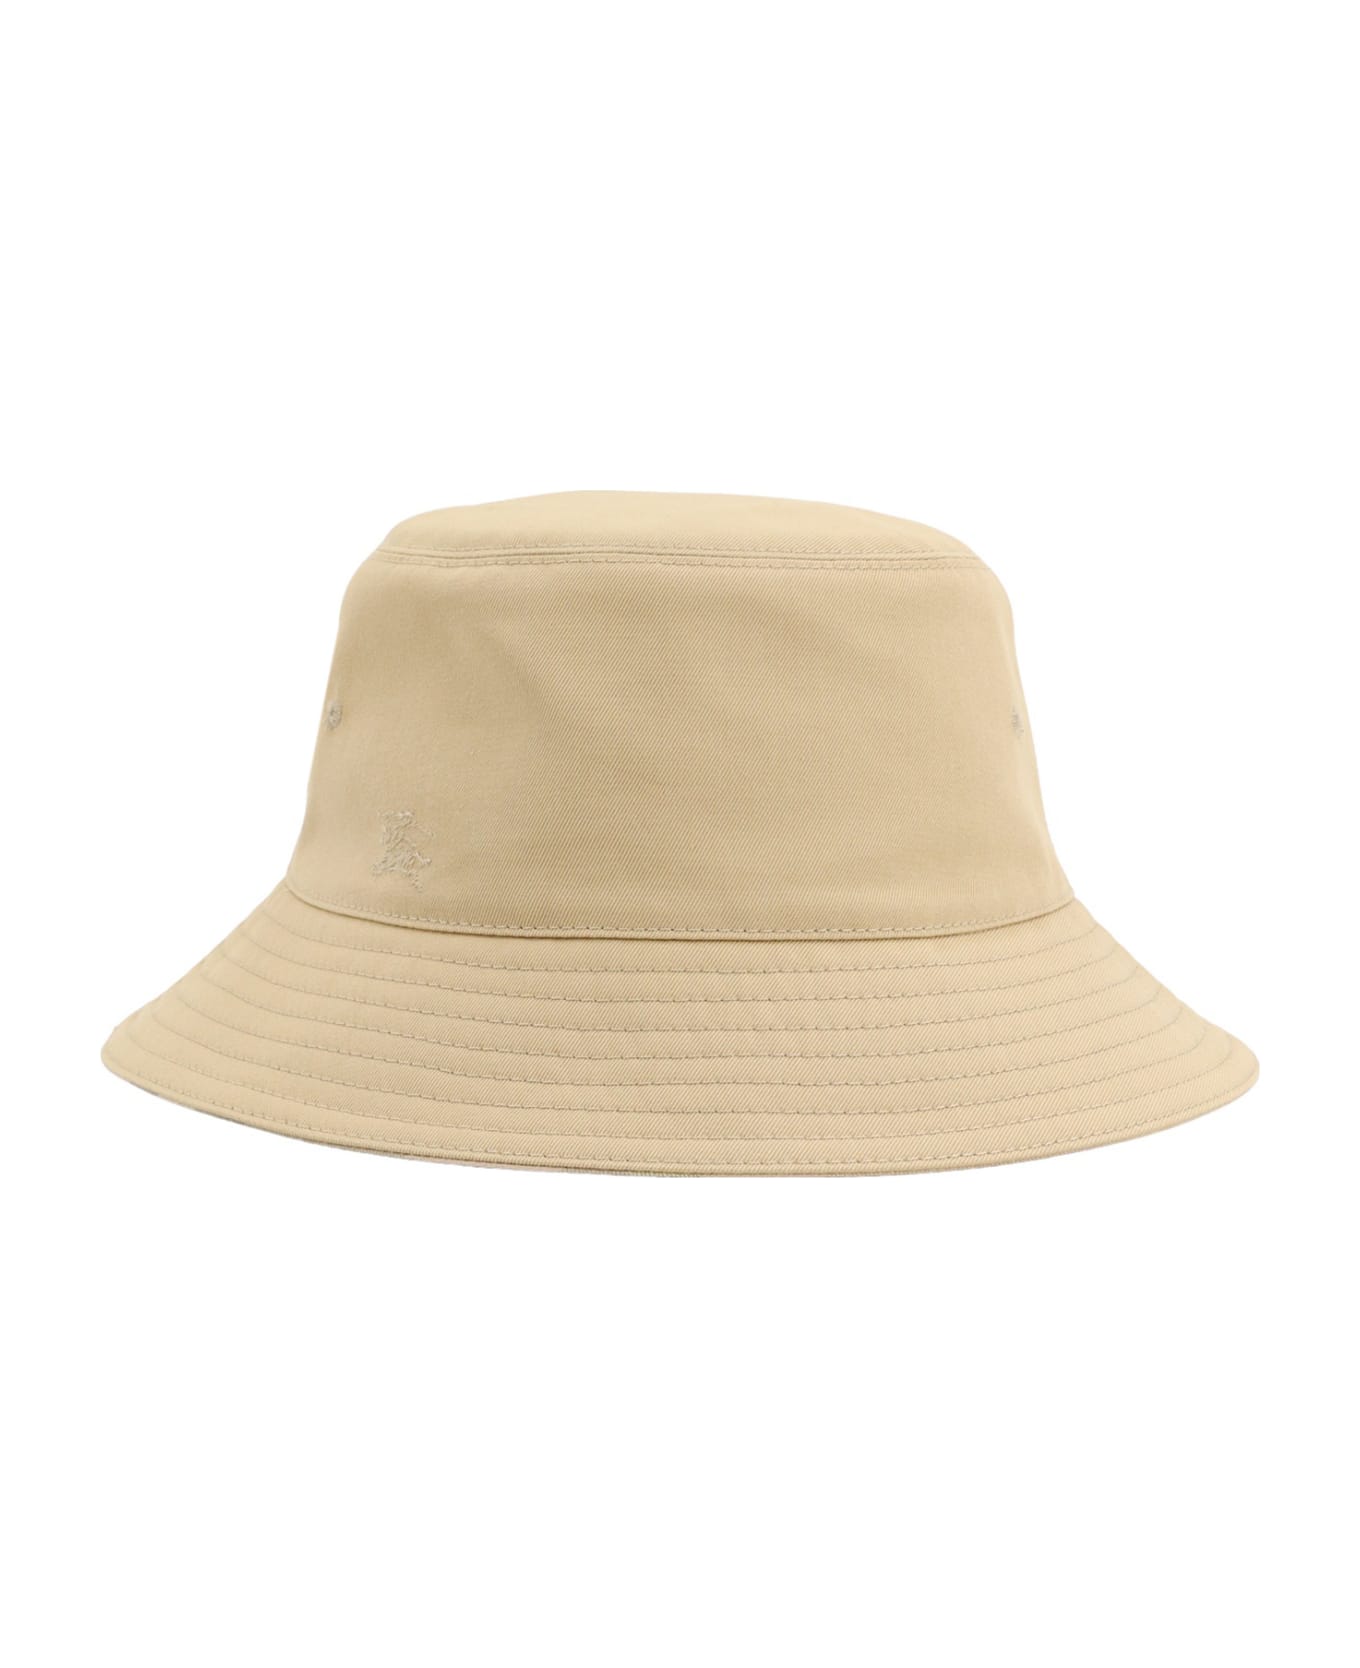 Burberry Check-pattern Reversible Pull-on Bucket Hat - Beige